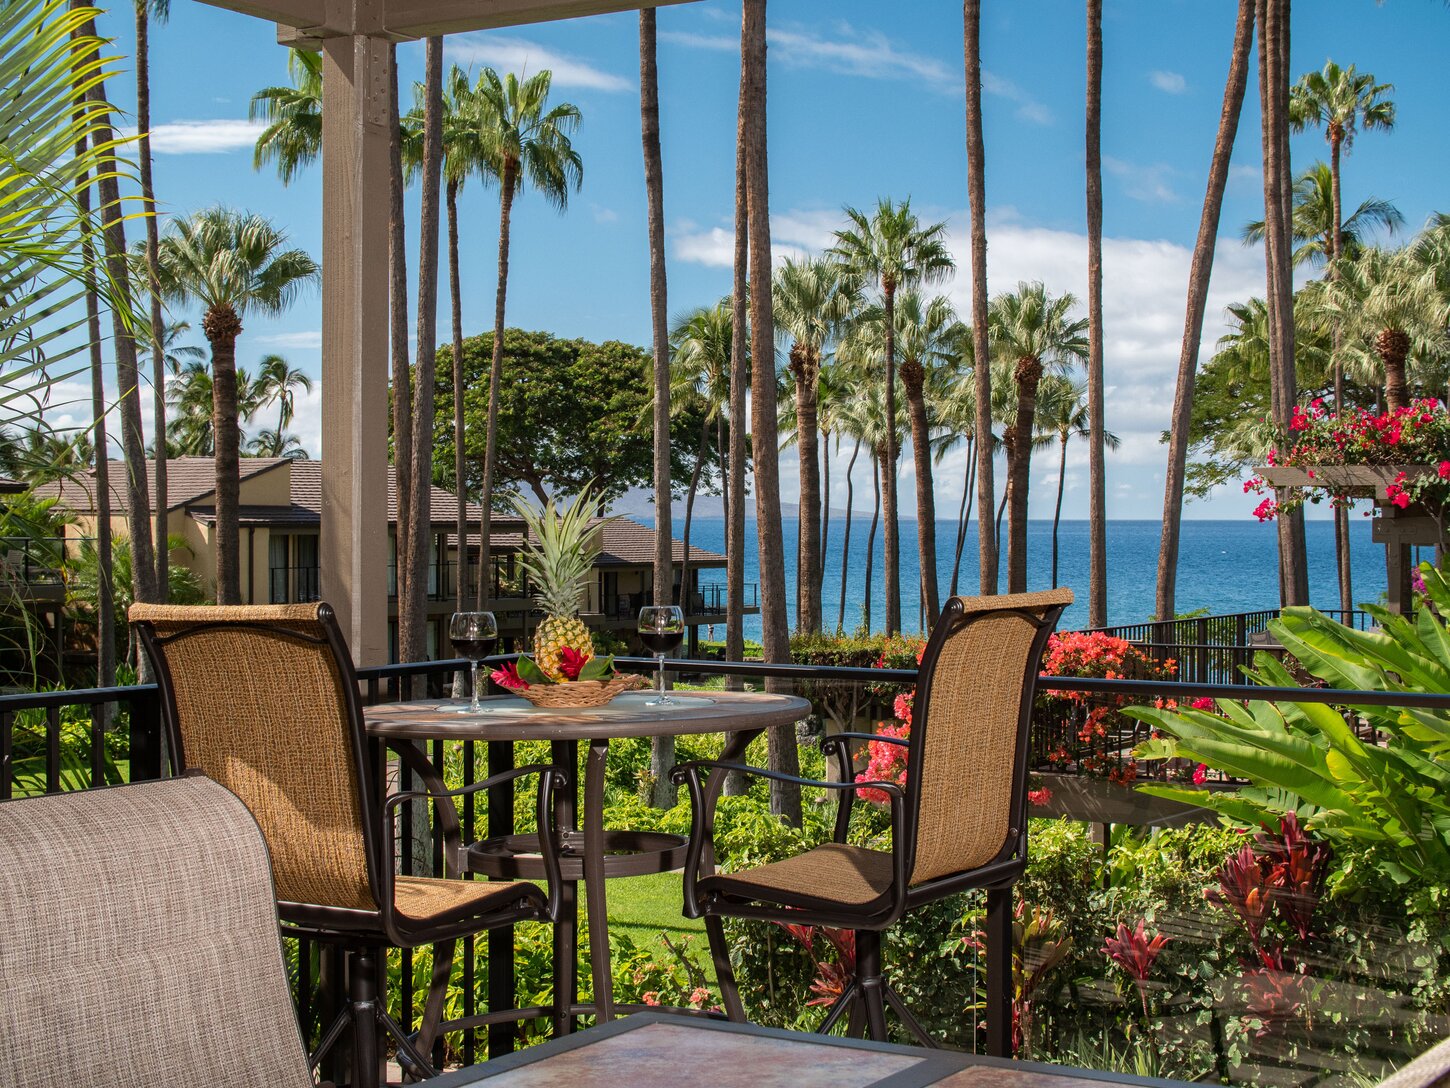 Lanai also has an intimate bar-height table with a wonderful ocean view